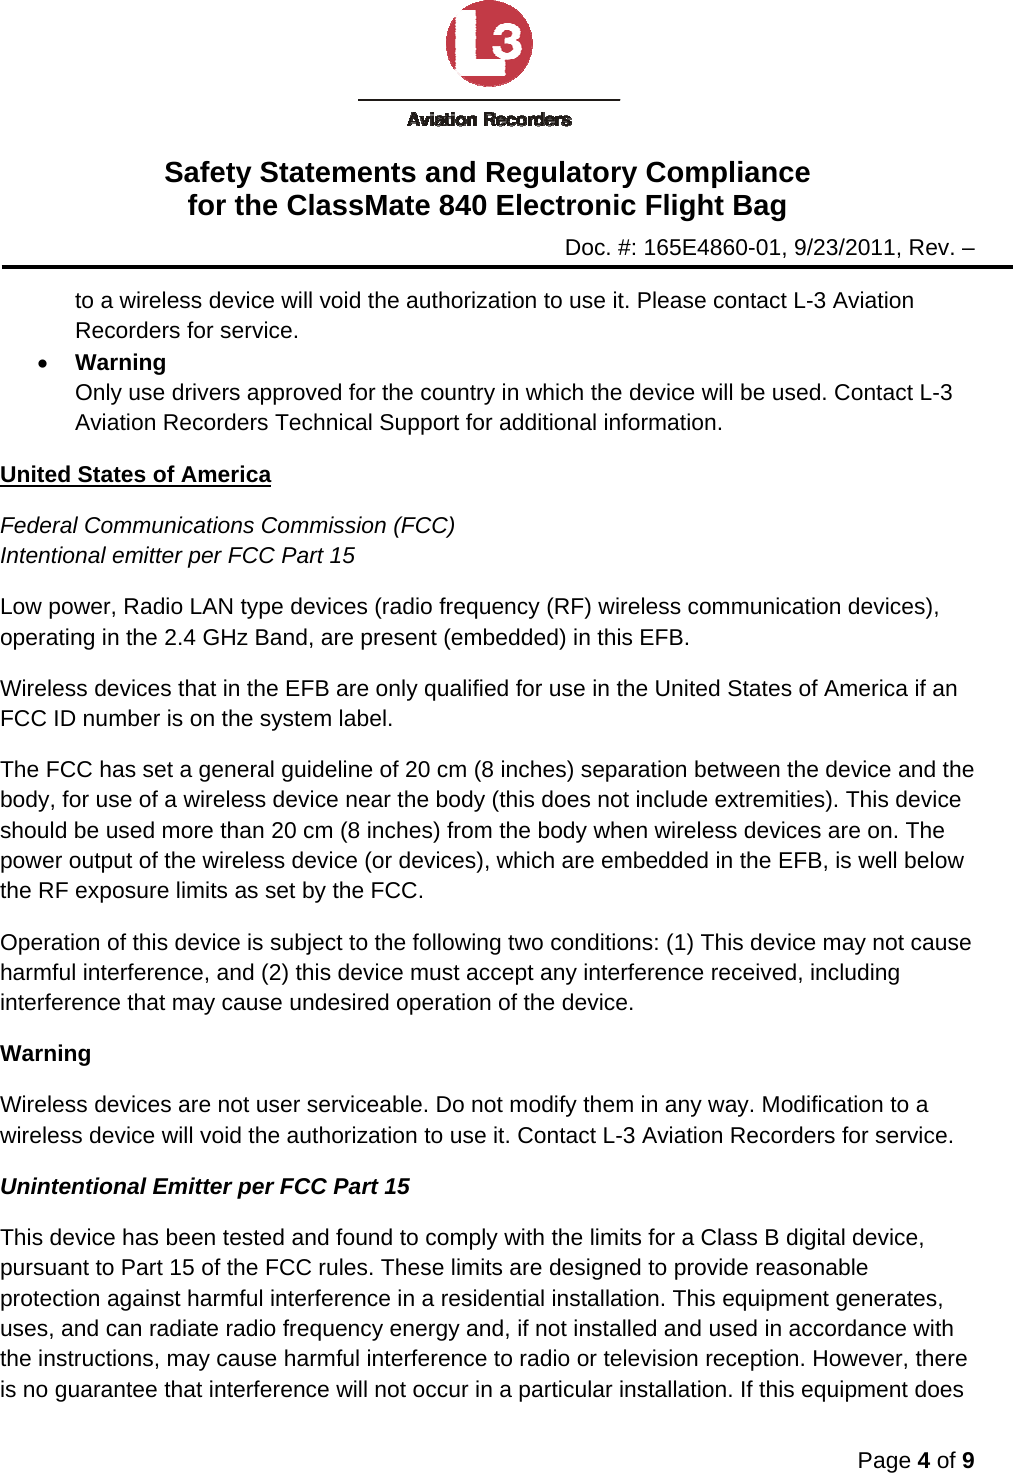 Safety Statements and Regulatory Compliance for the ClassMate 840 Electronic Flight Bag Doc. #: 165E4860-01, 9/23/2011, Rev. –  Page 4 of 9  to a wireless device will void the authorization to use it. Please contact L-3 Aviation Recorders for service. • Warning Only use drivers approved for the country in which the device will be used. Contact L-3 Aviation Recorders Technical Support for additional information. United States of America Federal Communications Commission (FCC) Intentional emitter per FCC Part 15 Low power, Radio LAN type devices (radio frequency (RF) wireless communication devices), operating in the 2.4 GHz Band, are present (embedded) in this EFB.  Wireless devices that in the EFB are only qualified for use in the United States of America if an FCC ID number is on the system label. The FCC has set a general guideline of 20 cm (8 inches) separation between the device and the body, for use of a wireless device near the body (this does not include extremities). This device should be used more than 20 cm (8 inches) from the body when wireless devices are on. The power output of the wireless device (or devices), which are embedded in the EFB, is well below the RF exposure limits as set by the FCC. Operation of this device is subject to the following two conditions: (1) This device may not cause harmful interference, and (2) this device must accept any interference received, including interference that may cause undesired operation of the device. Warning Wireless devices are not user serviceable. Do not modify them in any way. Modification to a wireless device will void the authorization to use it. Contact L-3 Aviation Recorders for service. Unintentional Emitter per FCC Part 15 This device has been tested and found to comply with the limits for a Class B digital device, pursuant to Part 15 of the FCC rules. These limits are designed to provide reasonable protection against harmful interference in a residential installation. This equipment generates, uses, and can radiate radio frequency energy and, if not installed and used in accordance with the instructions, may cause harmful interference to radio or television reception. However, there is no guarantee that interference will not occur in a particular installation. If this equipment does 